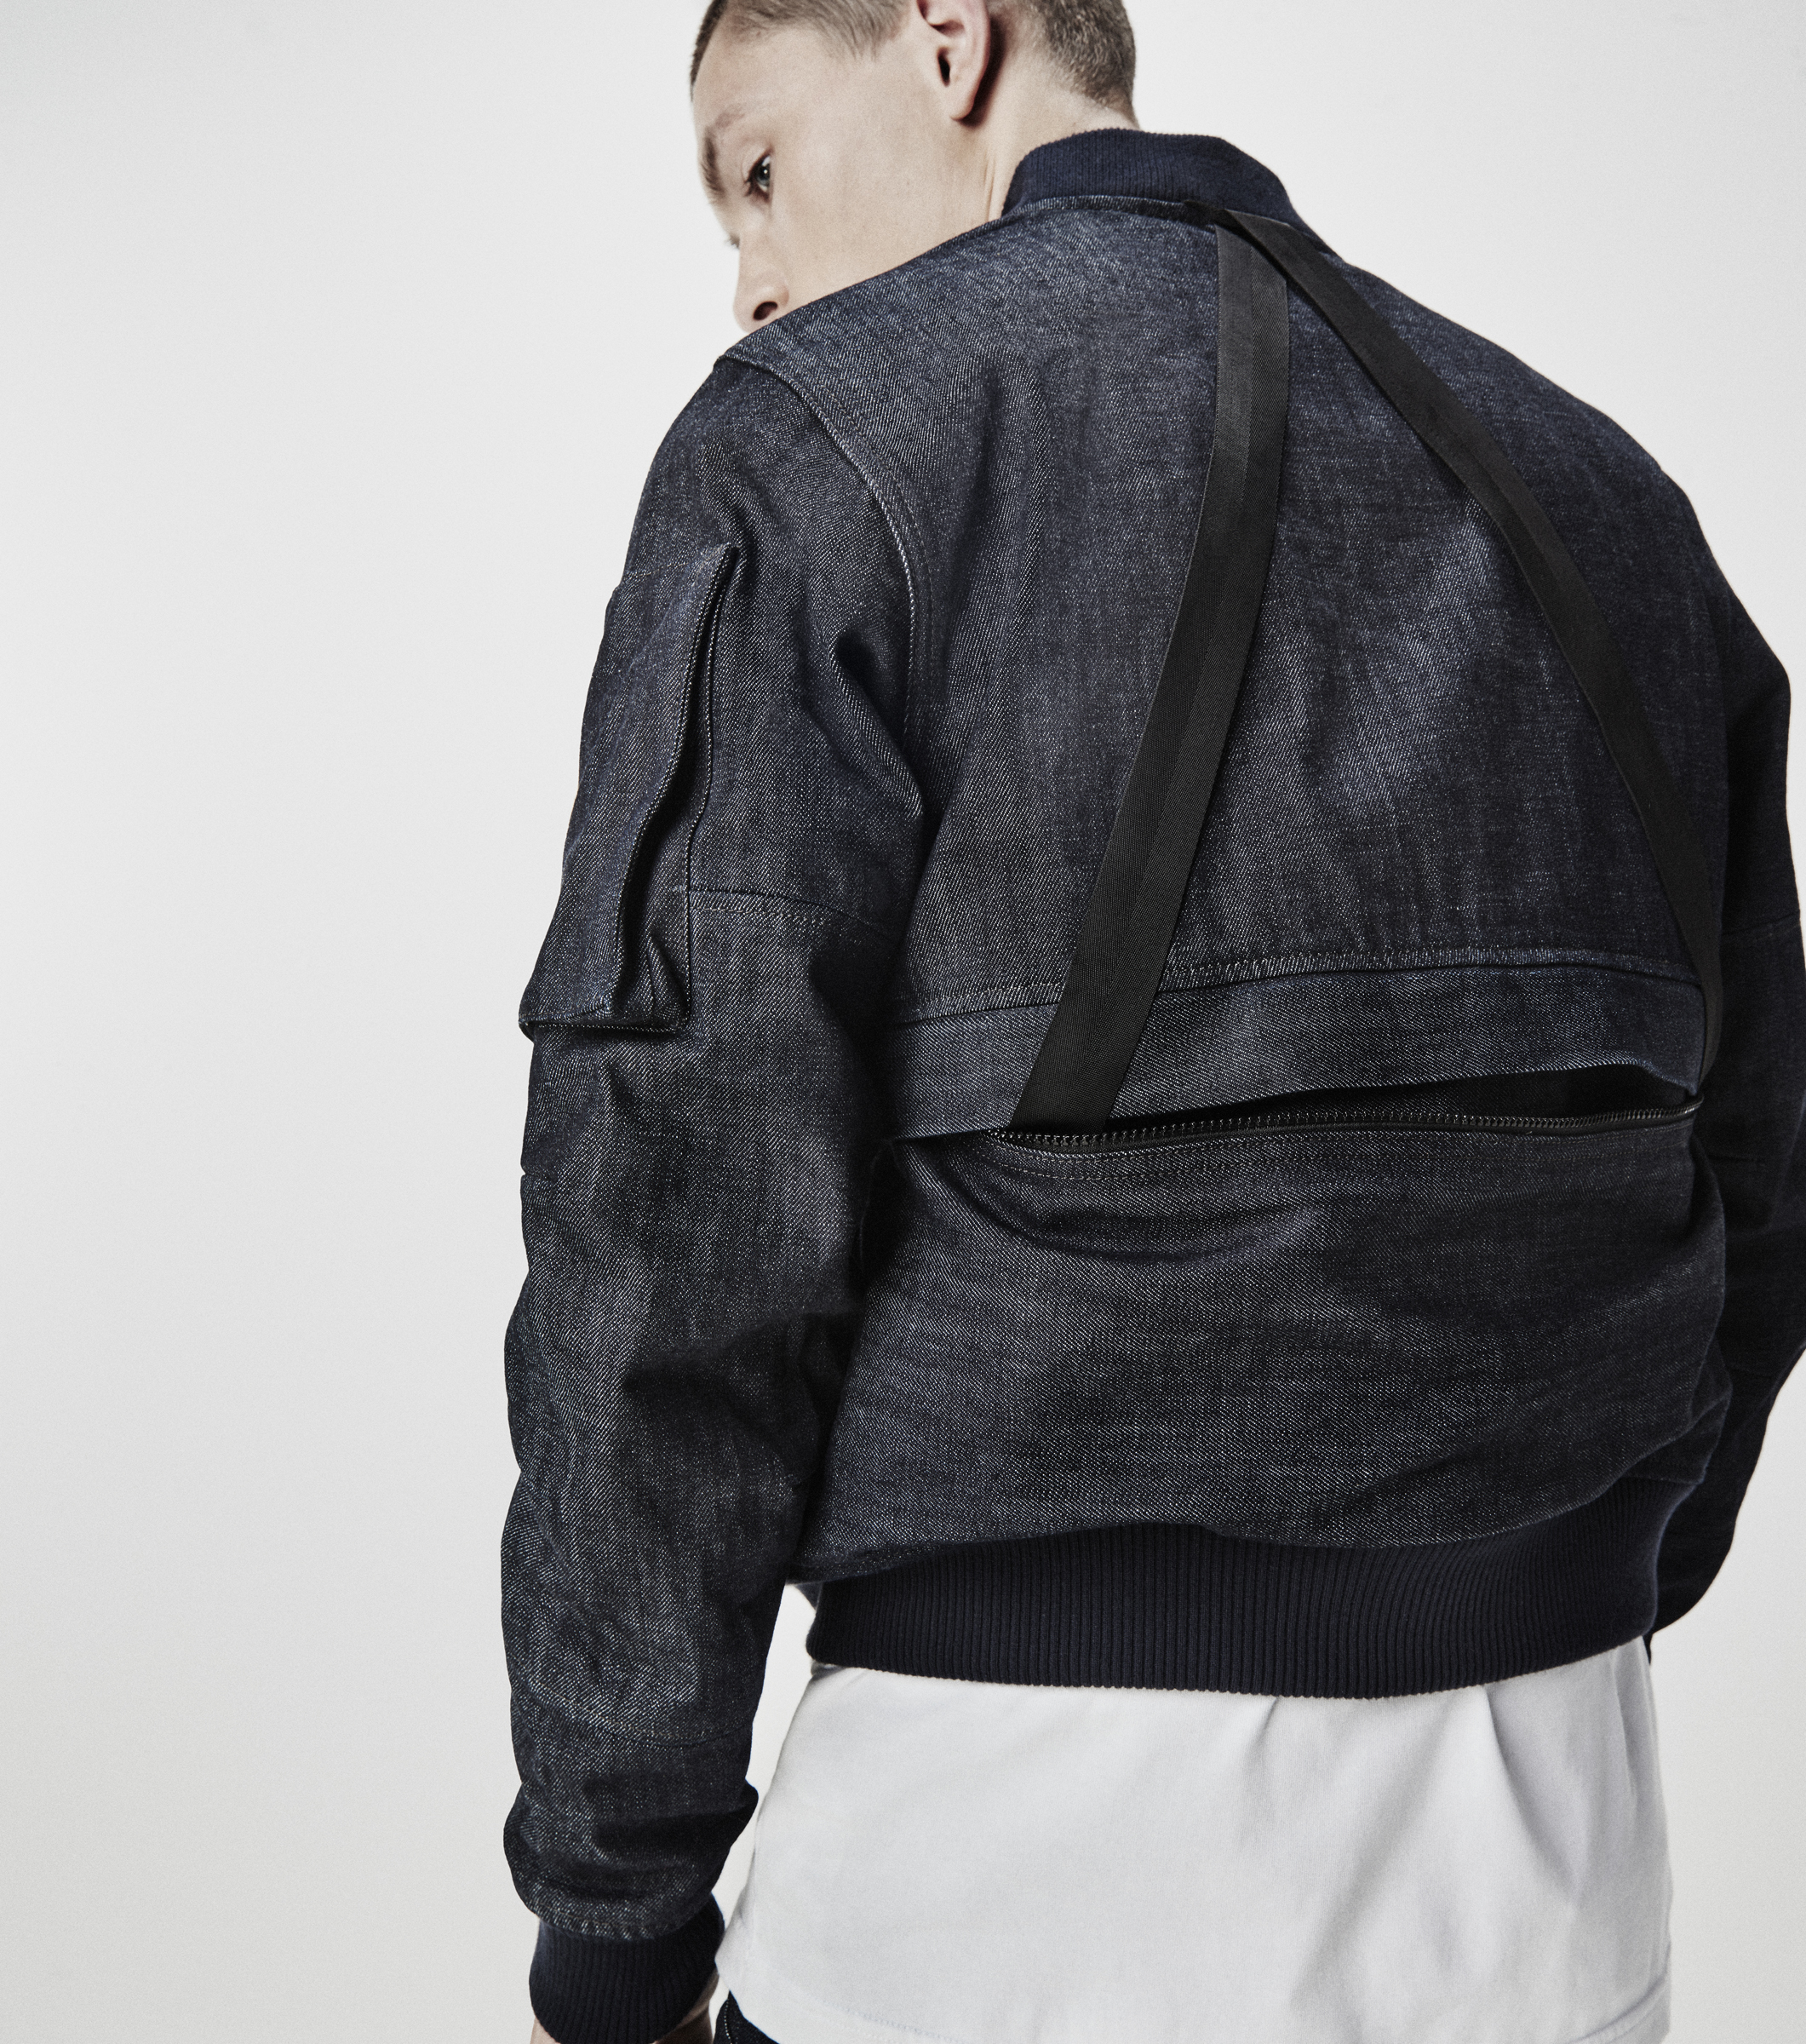 G Star Raw Research 5